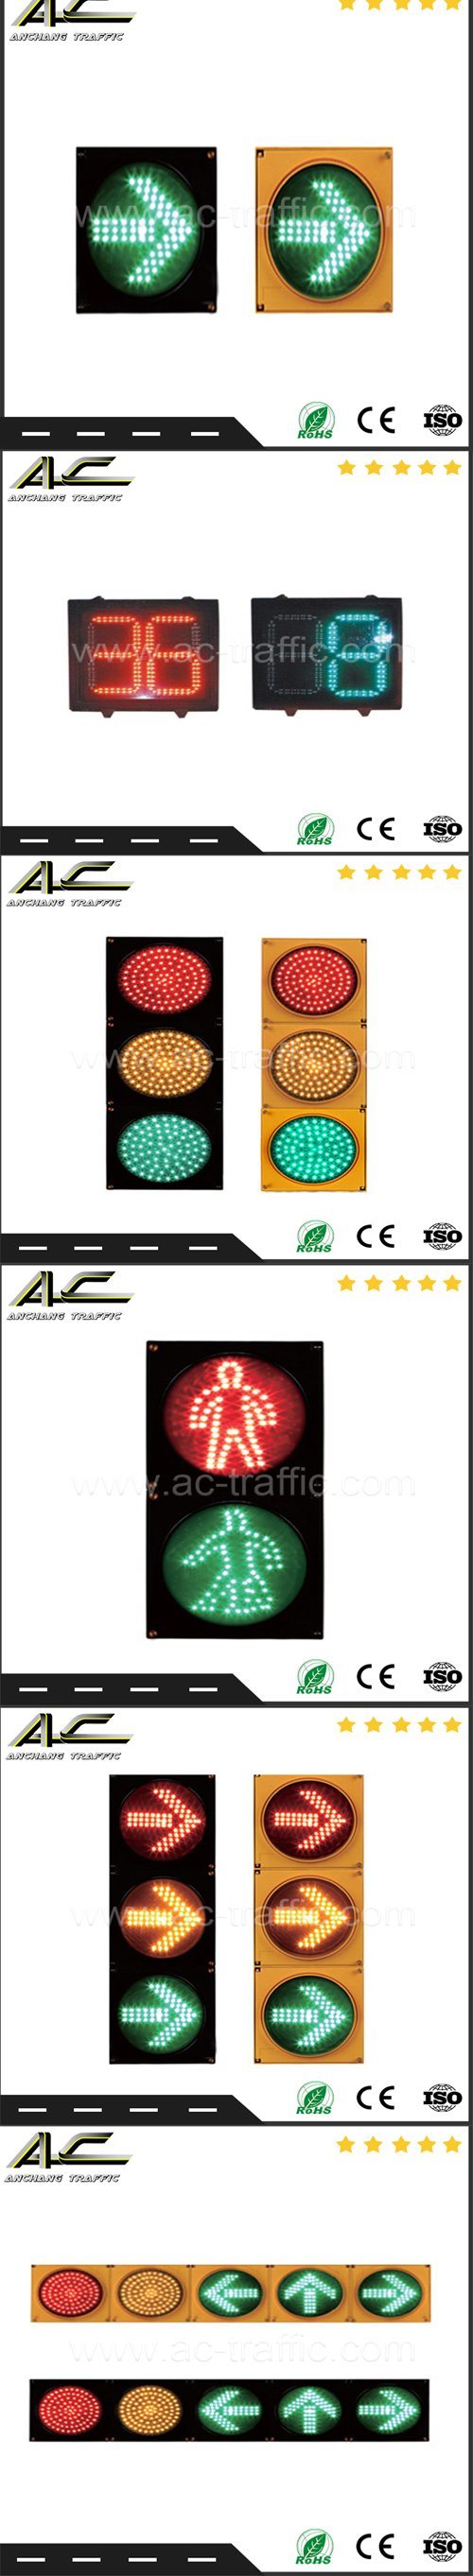 4 Ways Style Round Ball and Directional Arrow Traffic Signal Light